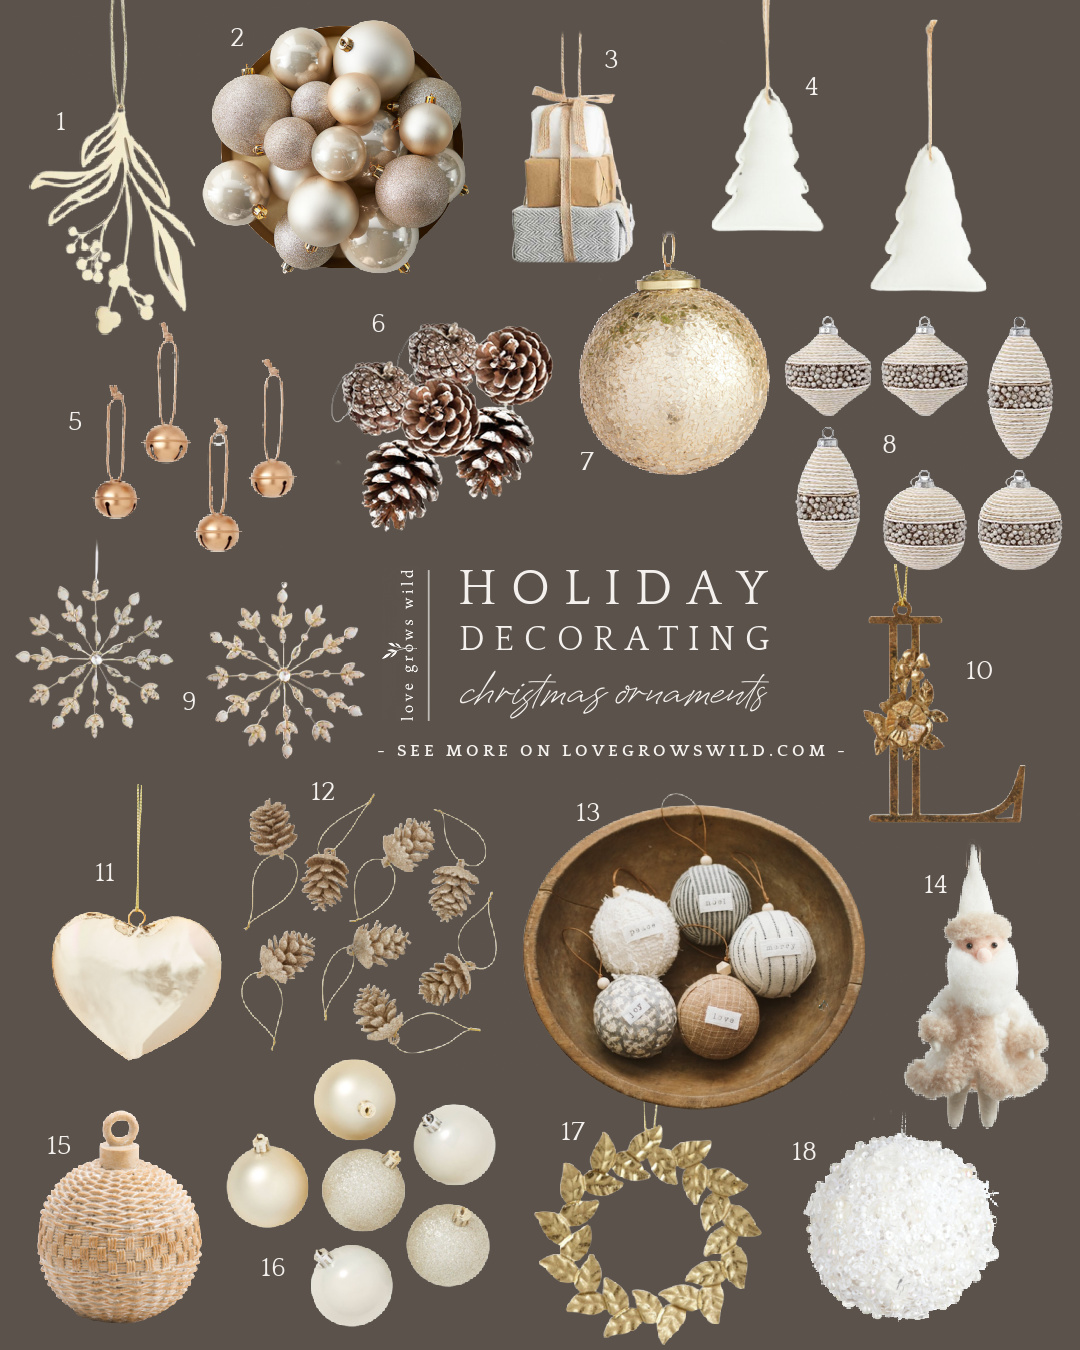 Christmas ornaments for holiday decorating curated by home blogger Liz Fourez